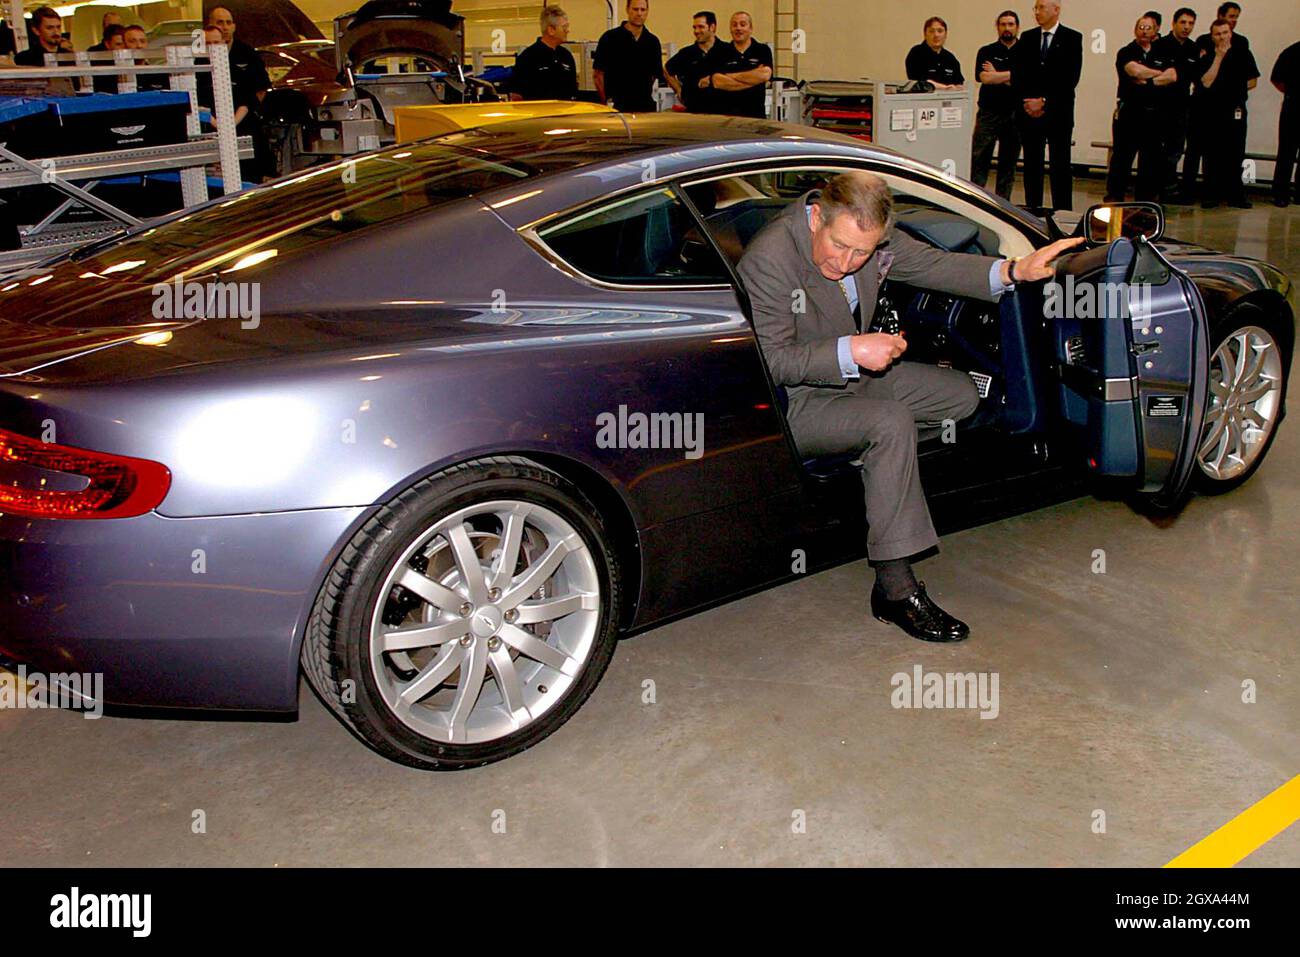 Prince Charles visits the Aston Martin factory at Gaydon Warwickshire, where he met production workers. One of the workers, Andrew McCarthy, displayed his tattoos to which Charles remarked his admiration for such a design.      Stock Photo